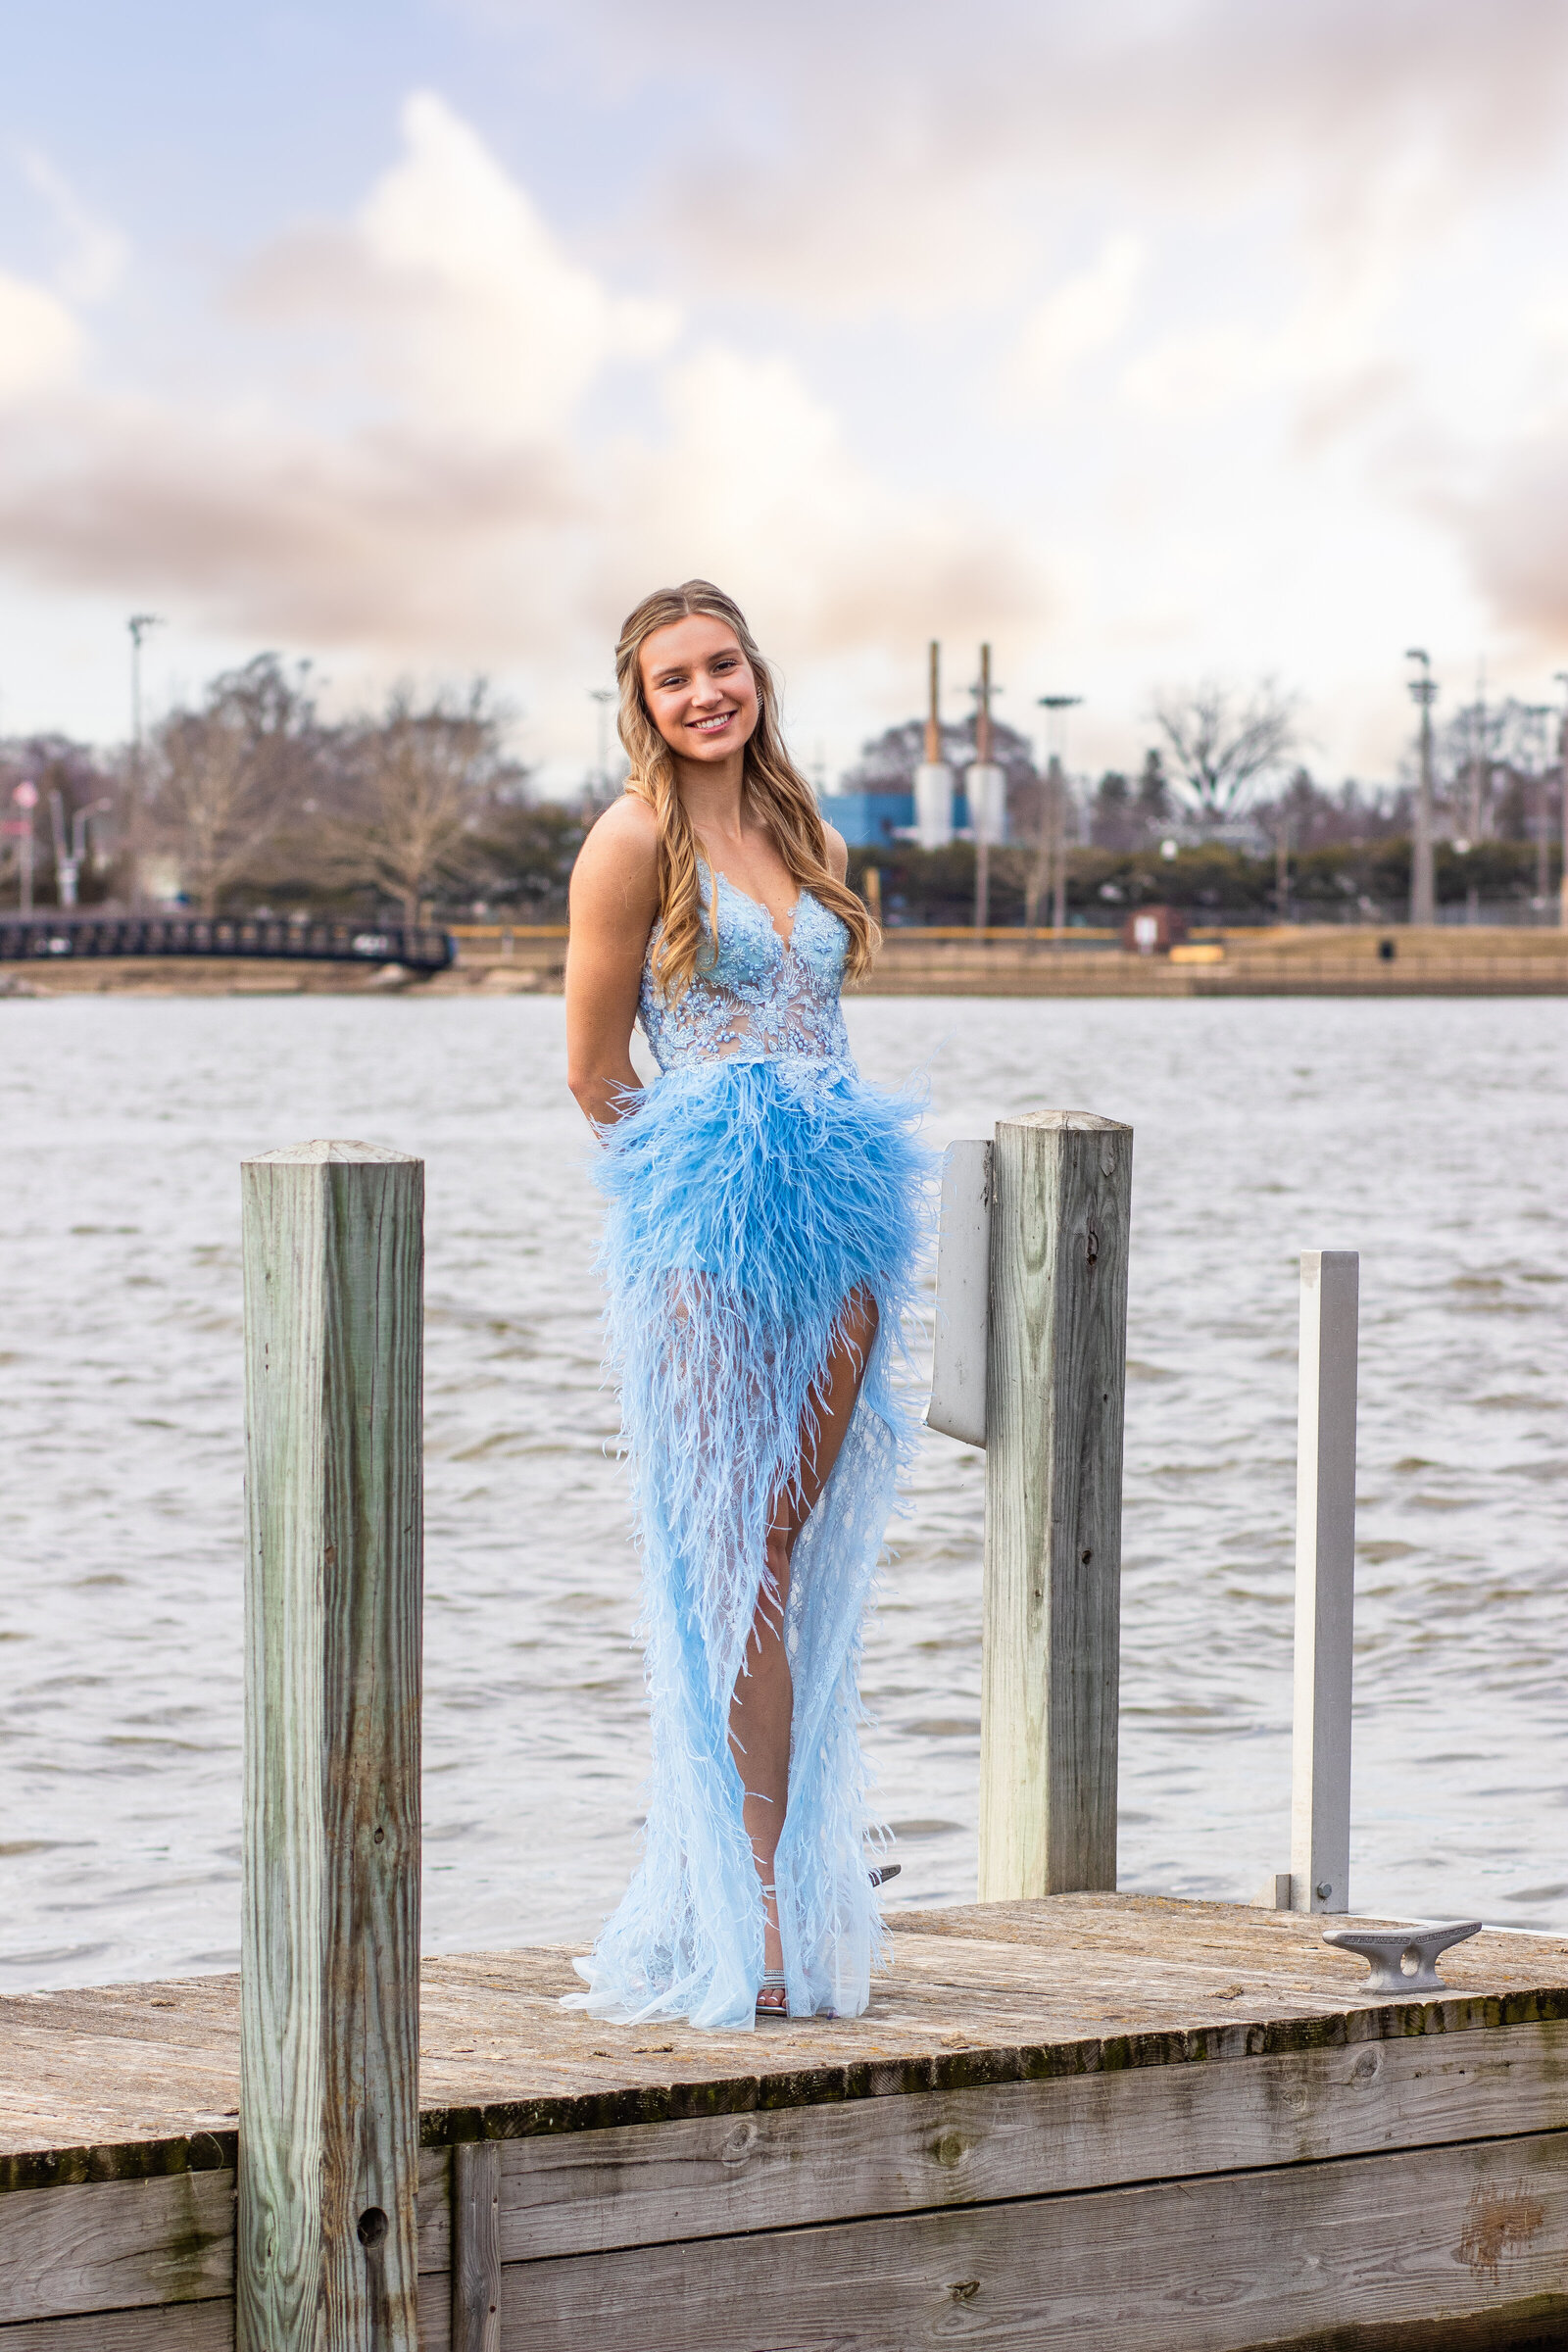 Contemporary, unique senior portrait by Michigan photographer: Devin Ramon Photography. Formal dress from Three Diamonds Prom and Formal.